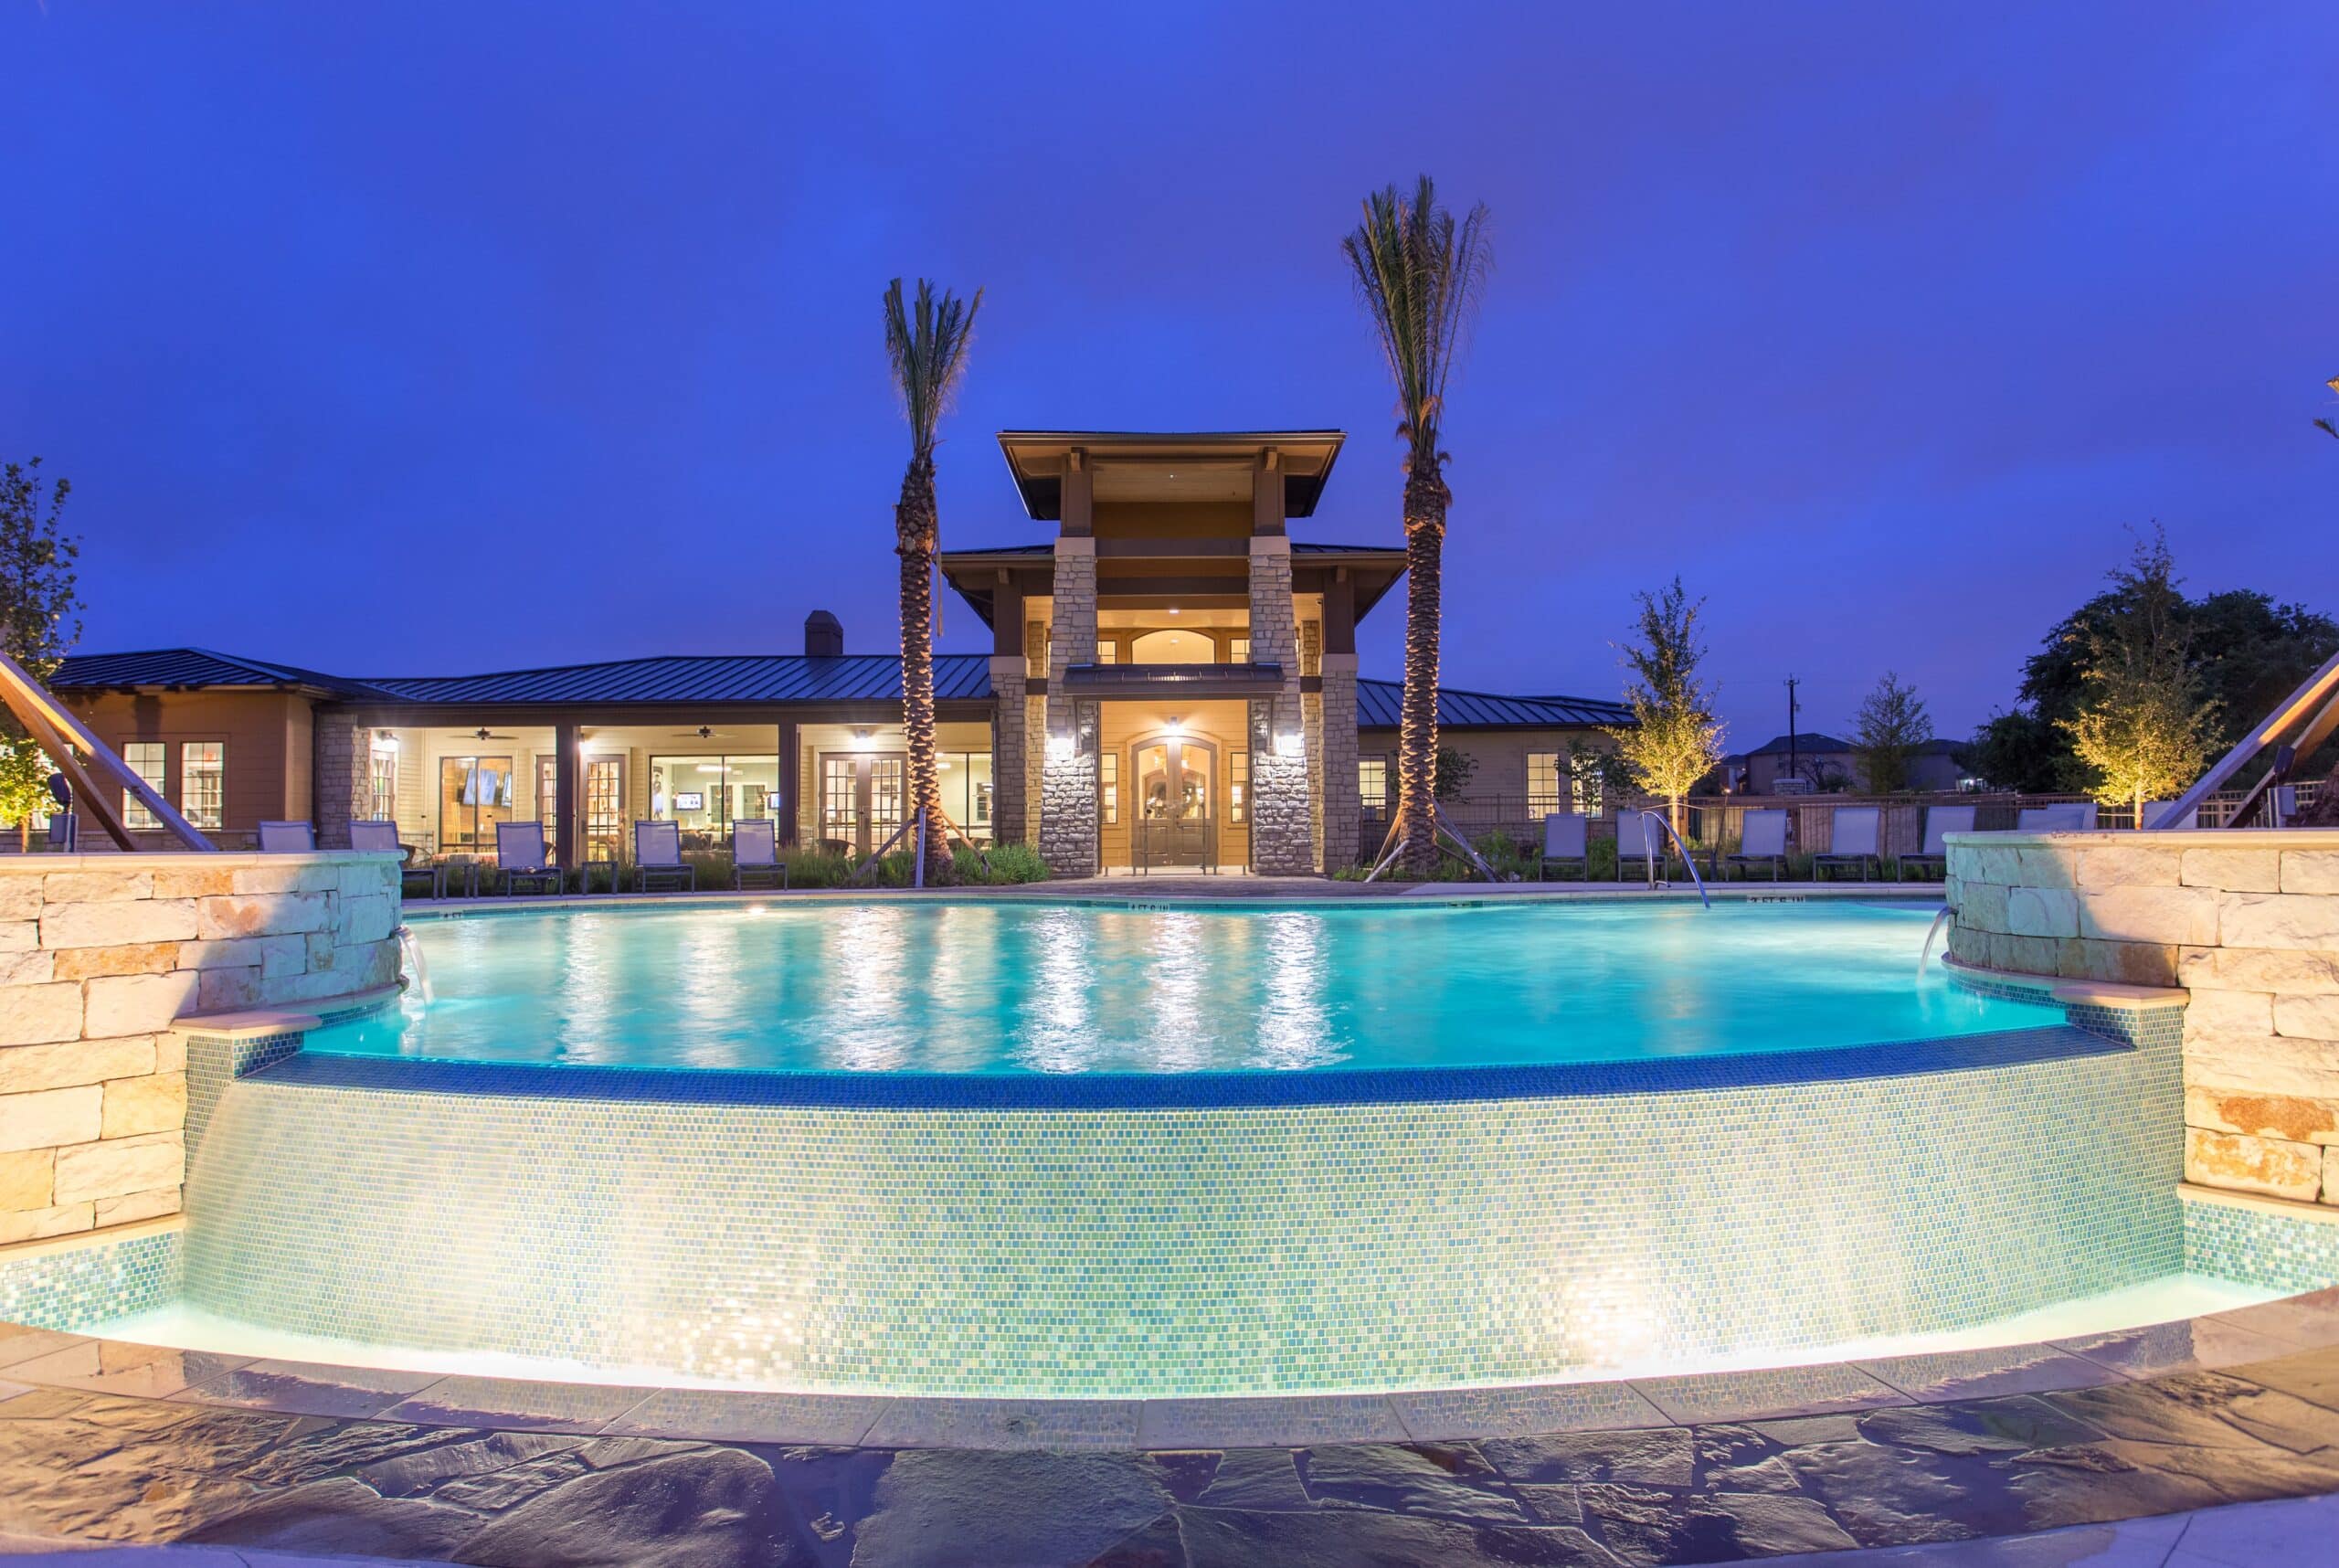 A nighttime view of the pool at Monterrey Village, illuminated by soft lighting, creating a tranquil and inviting atmosphere for residents to enjoy